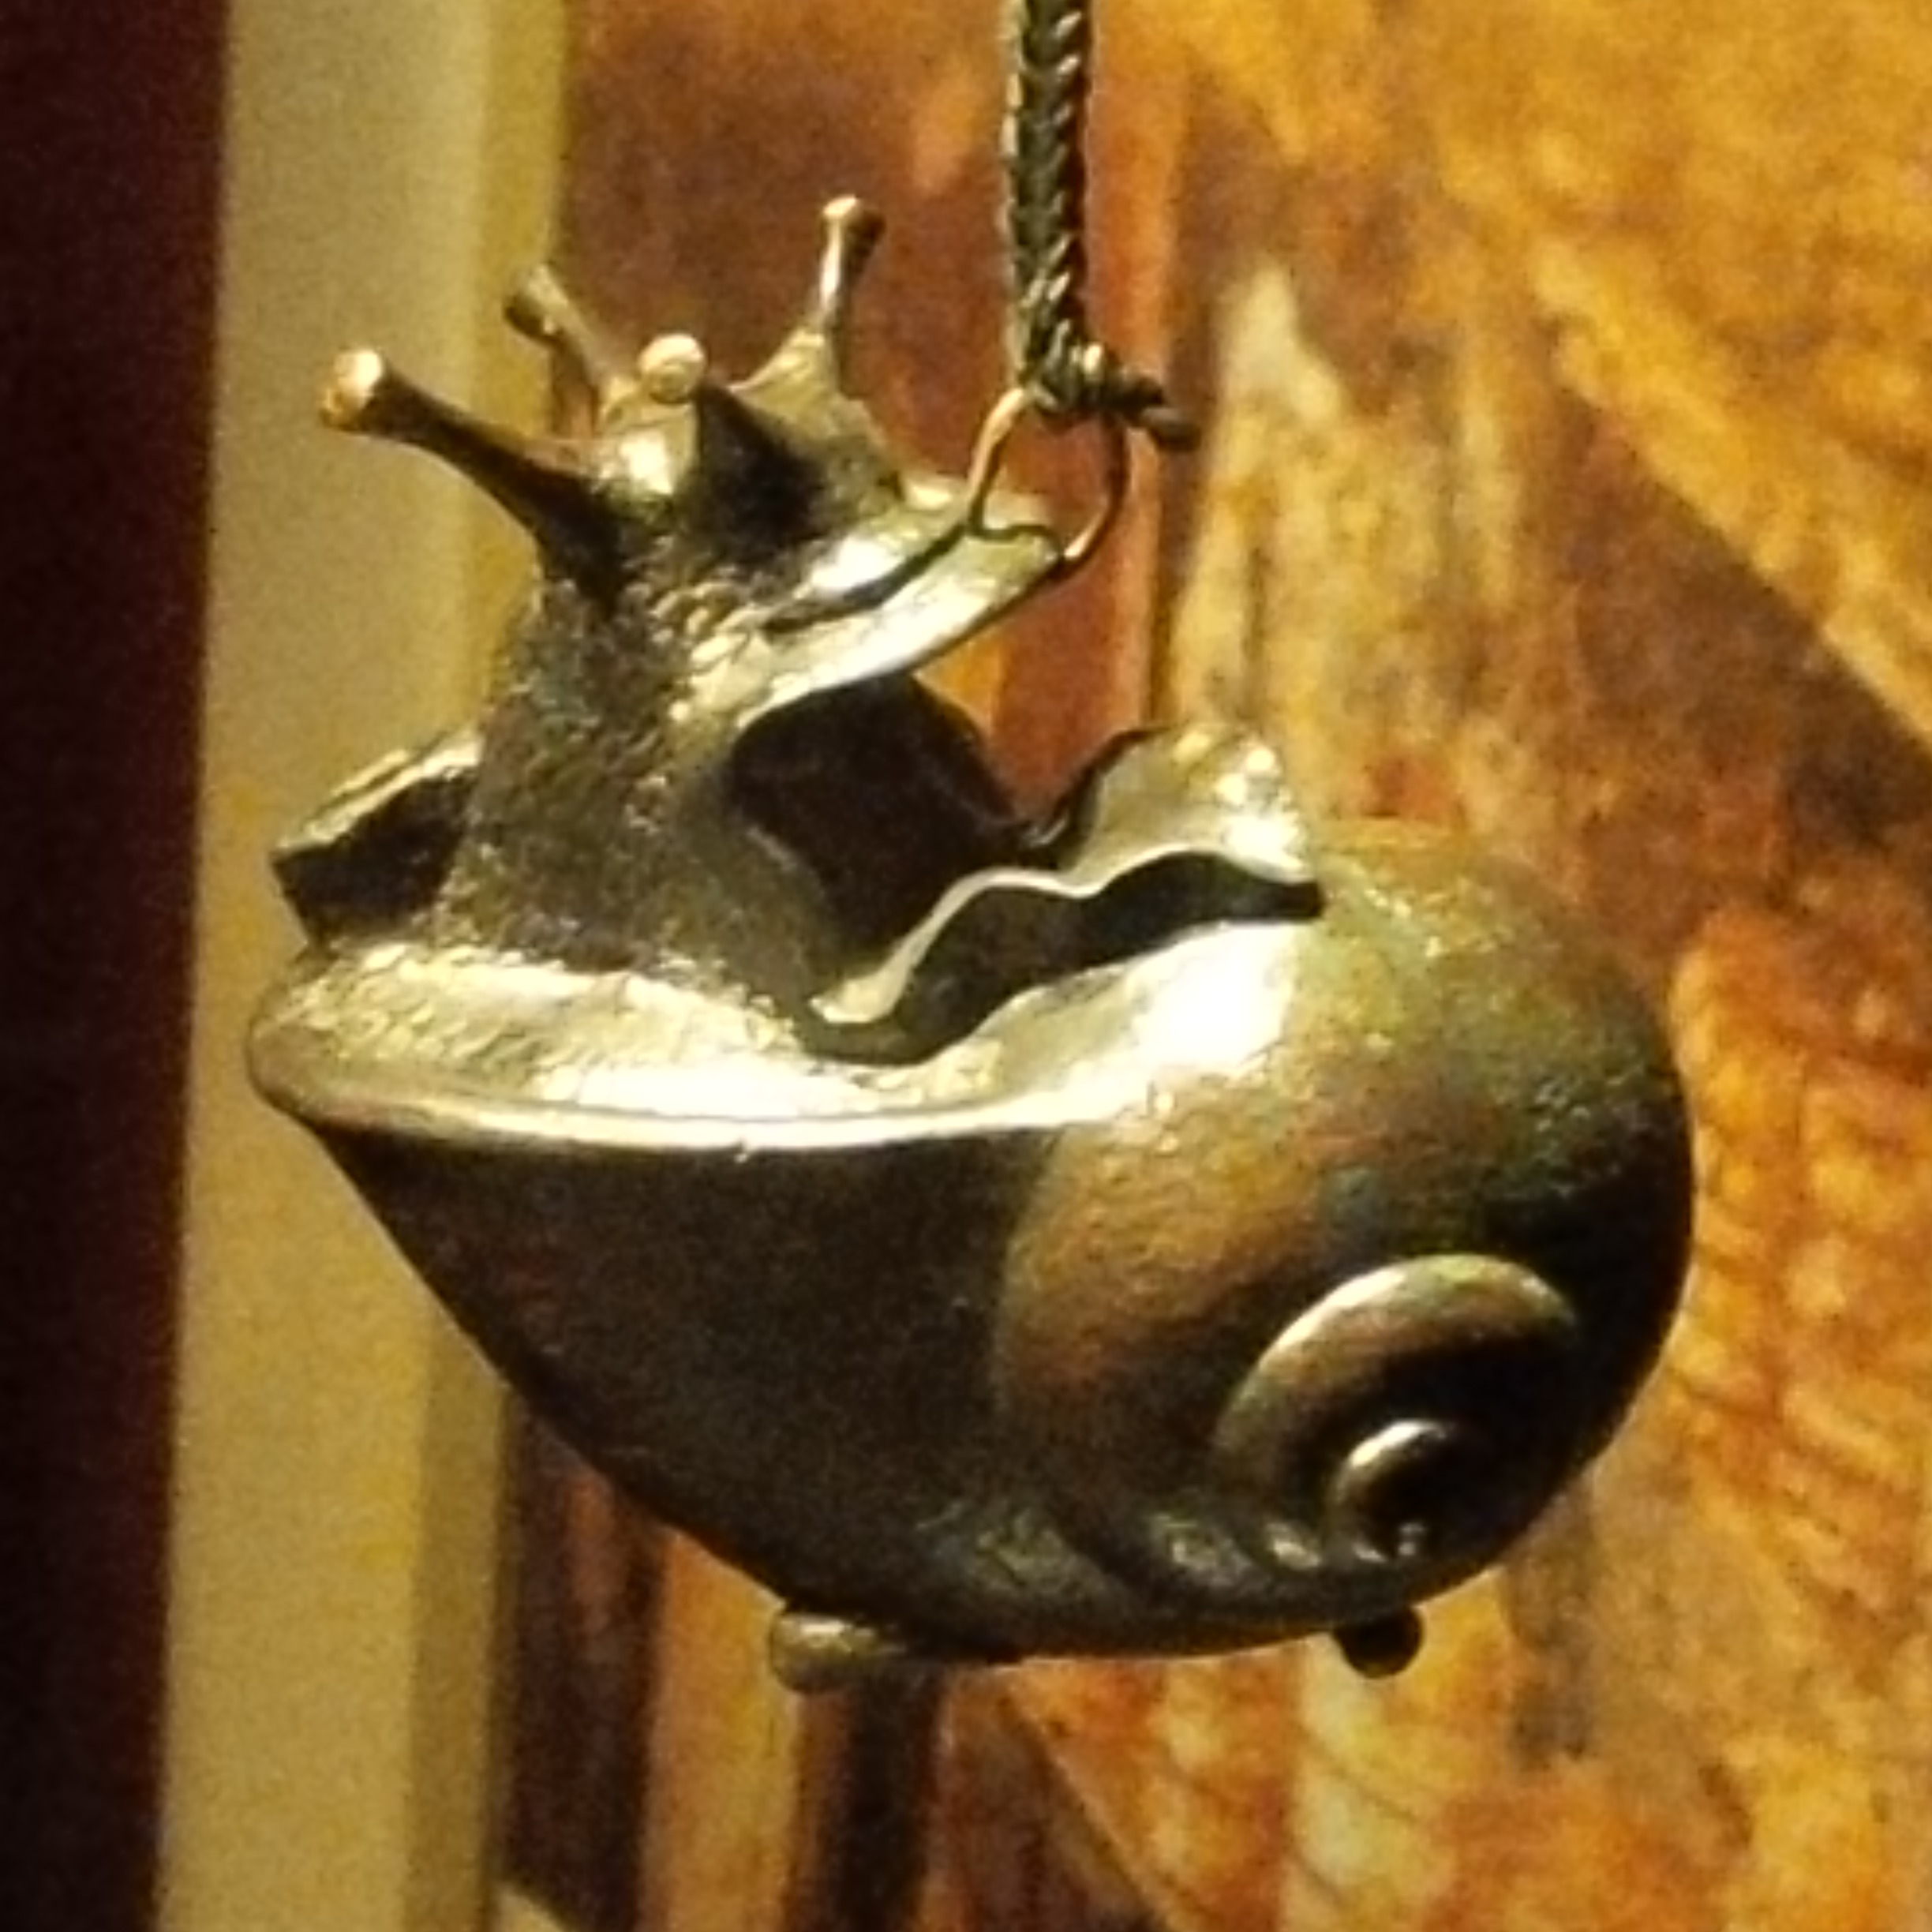 Snail as decor in this this oil lamp.